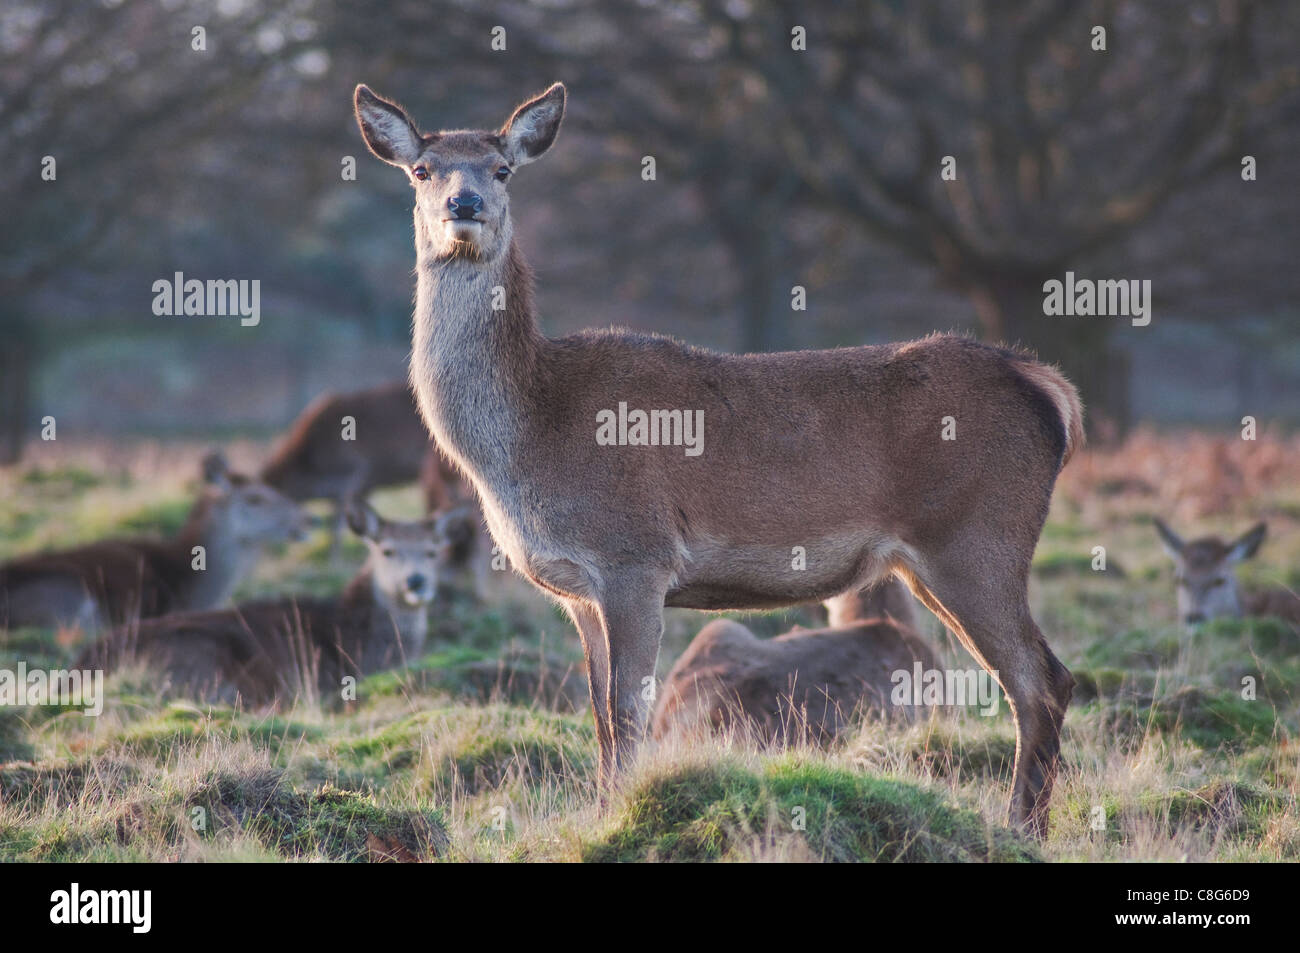 Deer in a London park at dusk Stock Photo